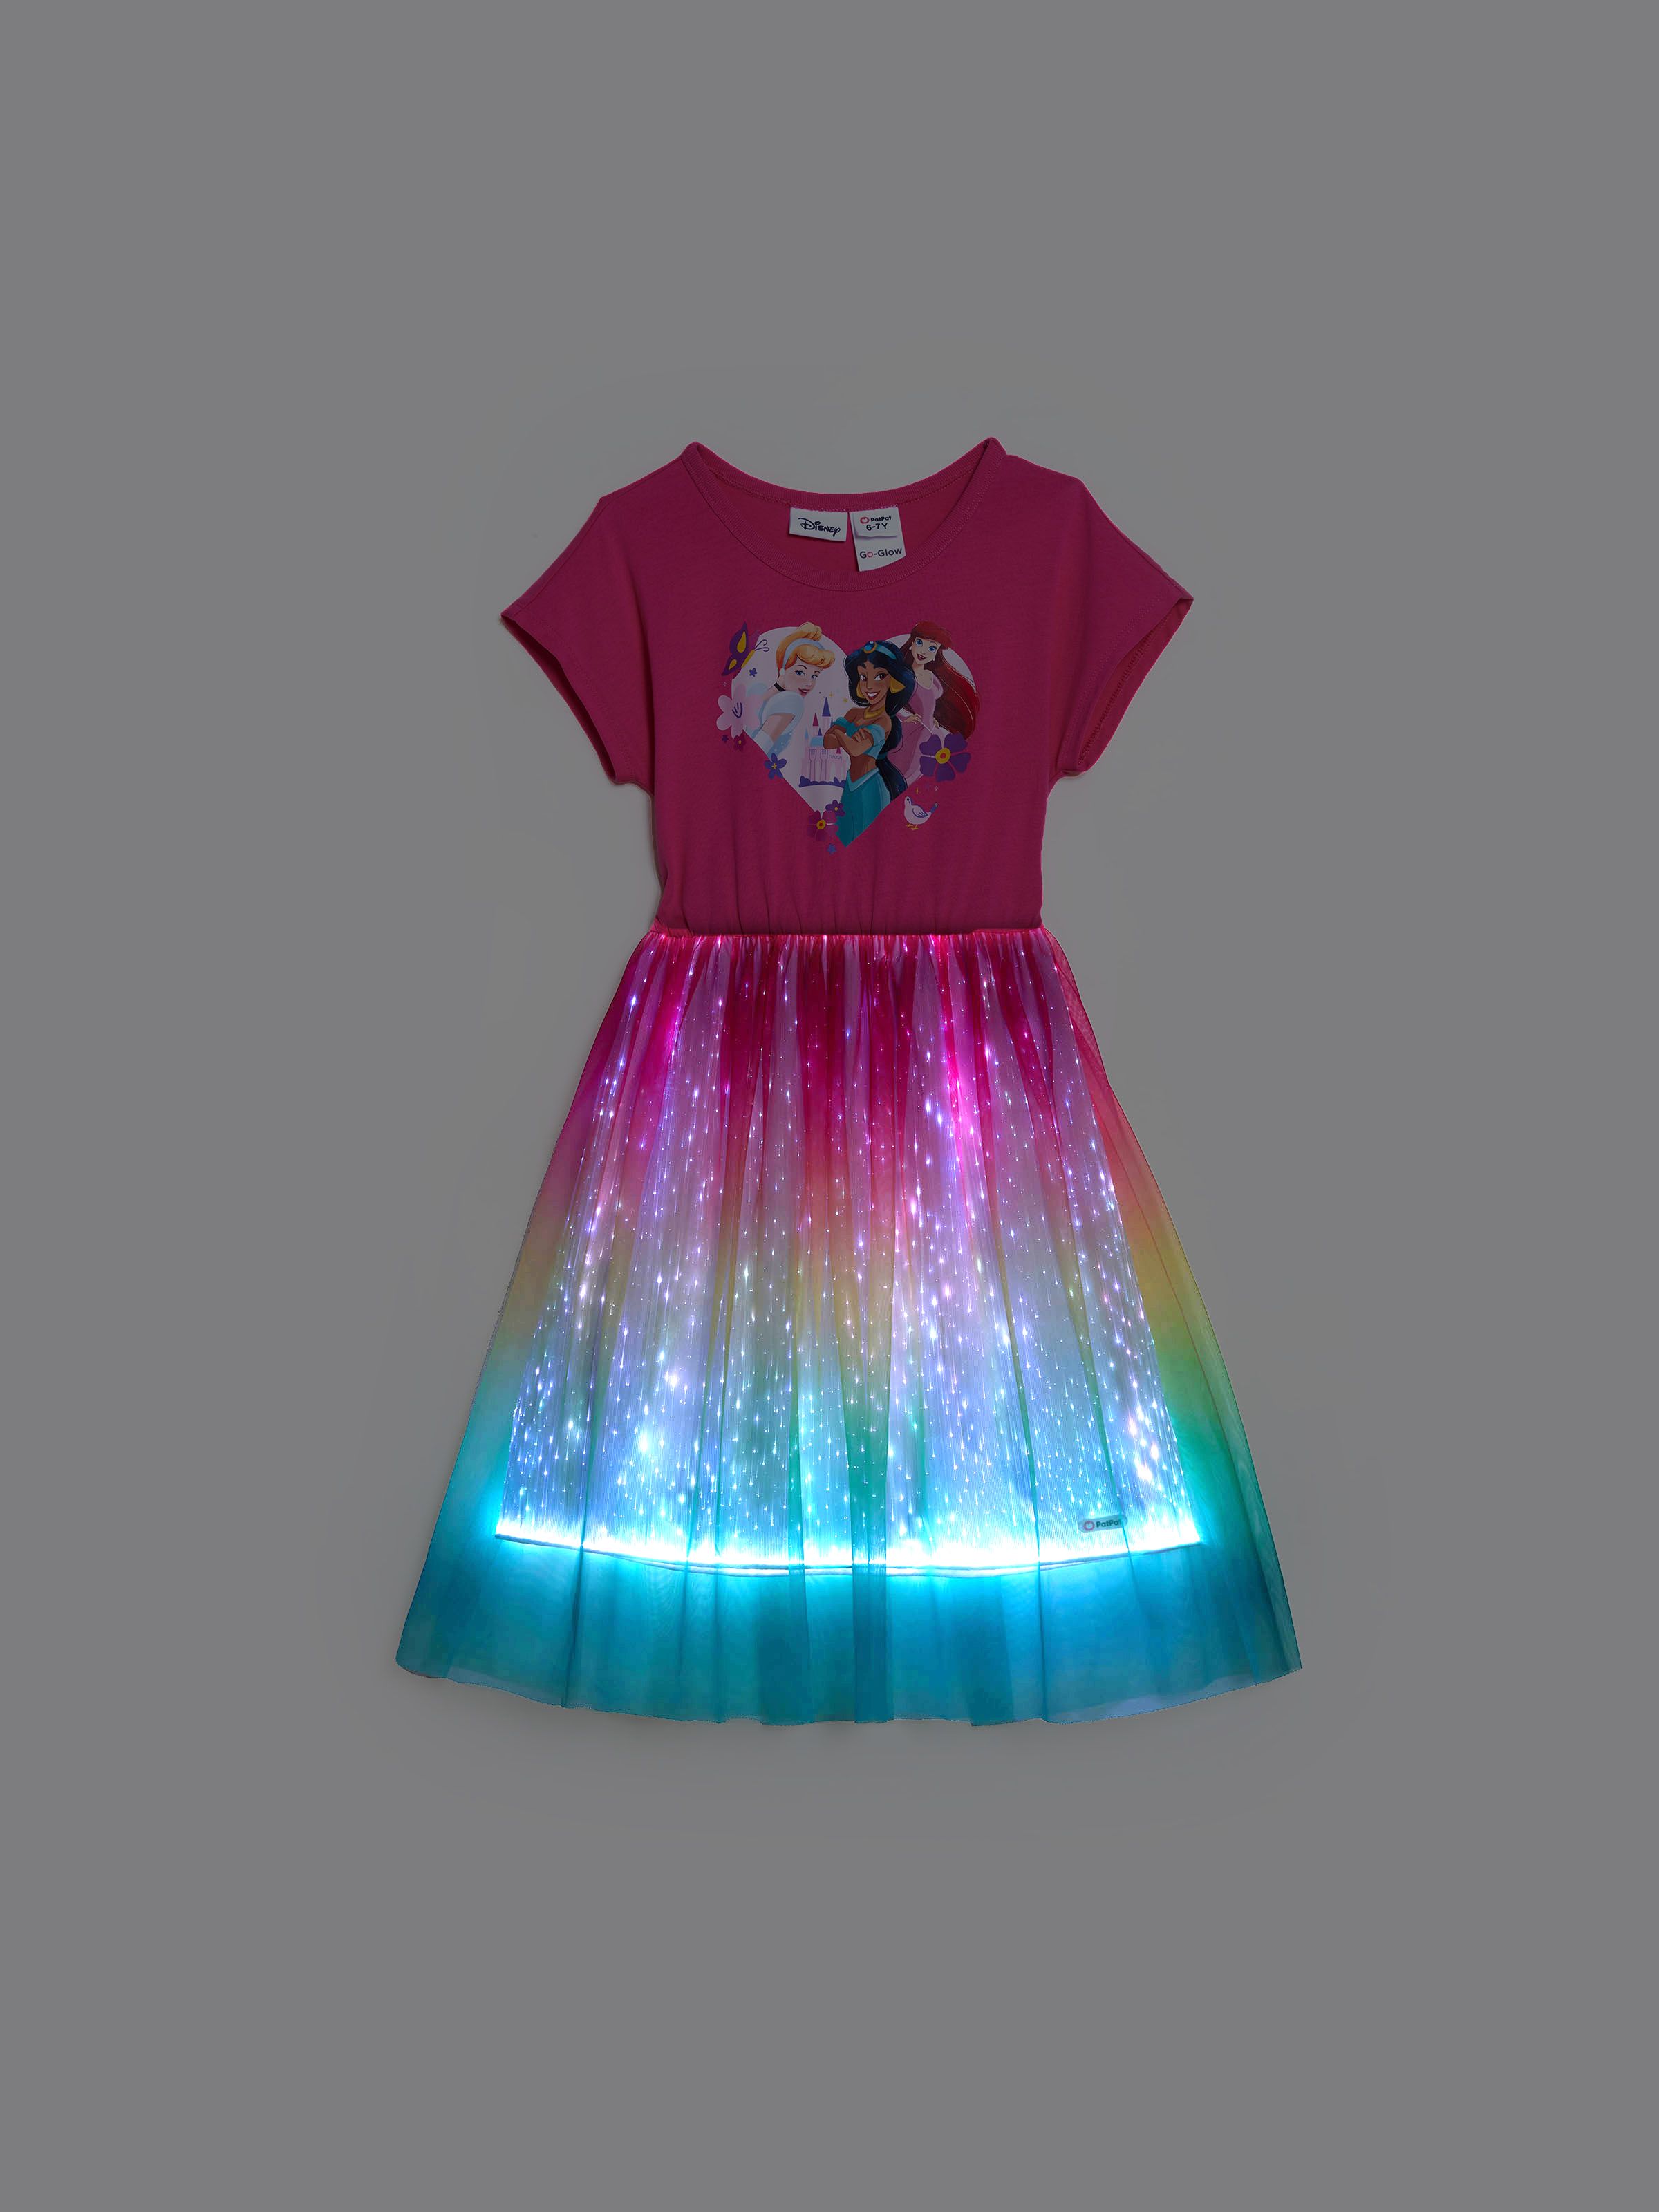 

Go-Glow Disney Princess Illuminating Multicolored Gradient Dress with Light Up Layered Tulle Skirt Including Controller (Built-In Battery)